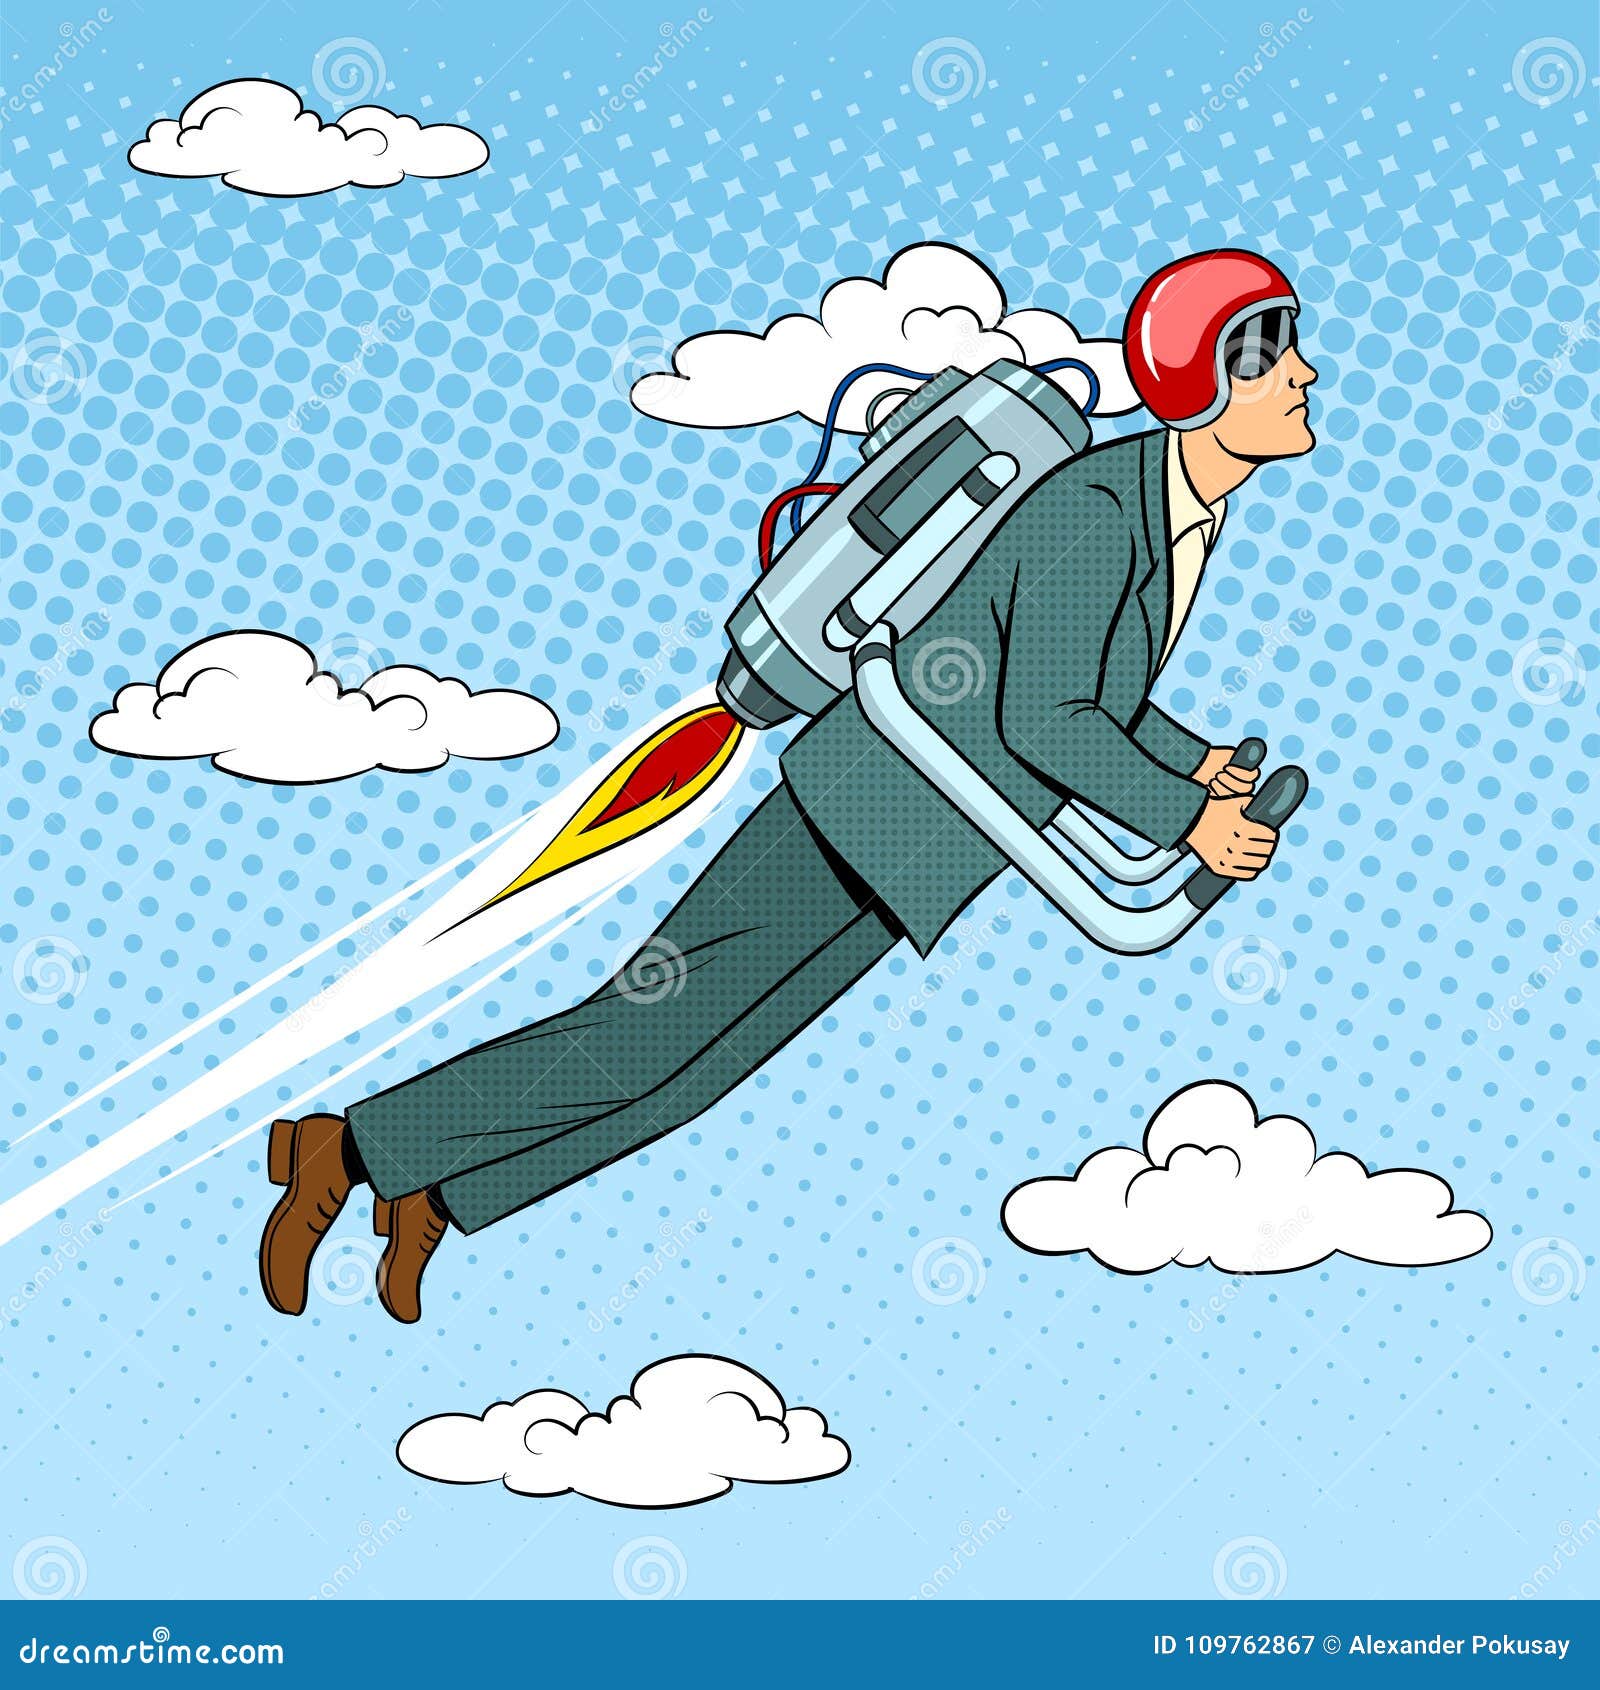 60+ Jet Pack Flame Stock Illustrations, Royalty-Free Vector